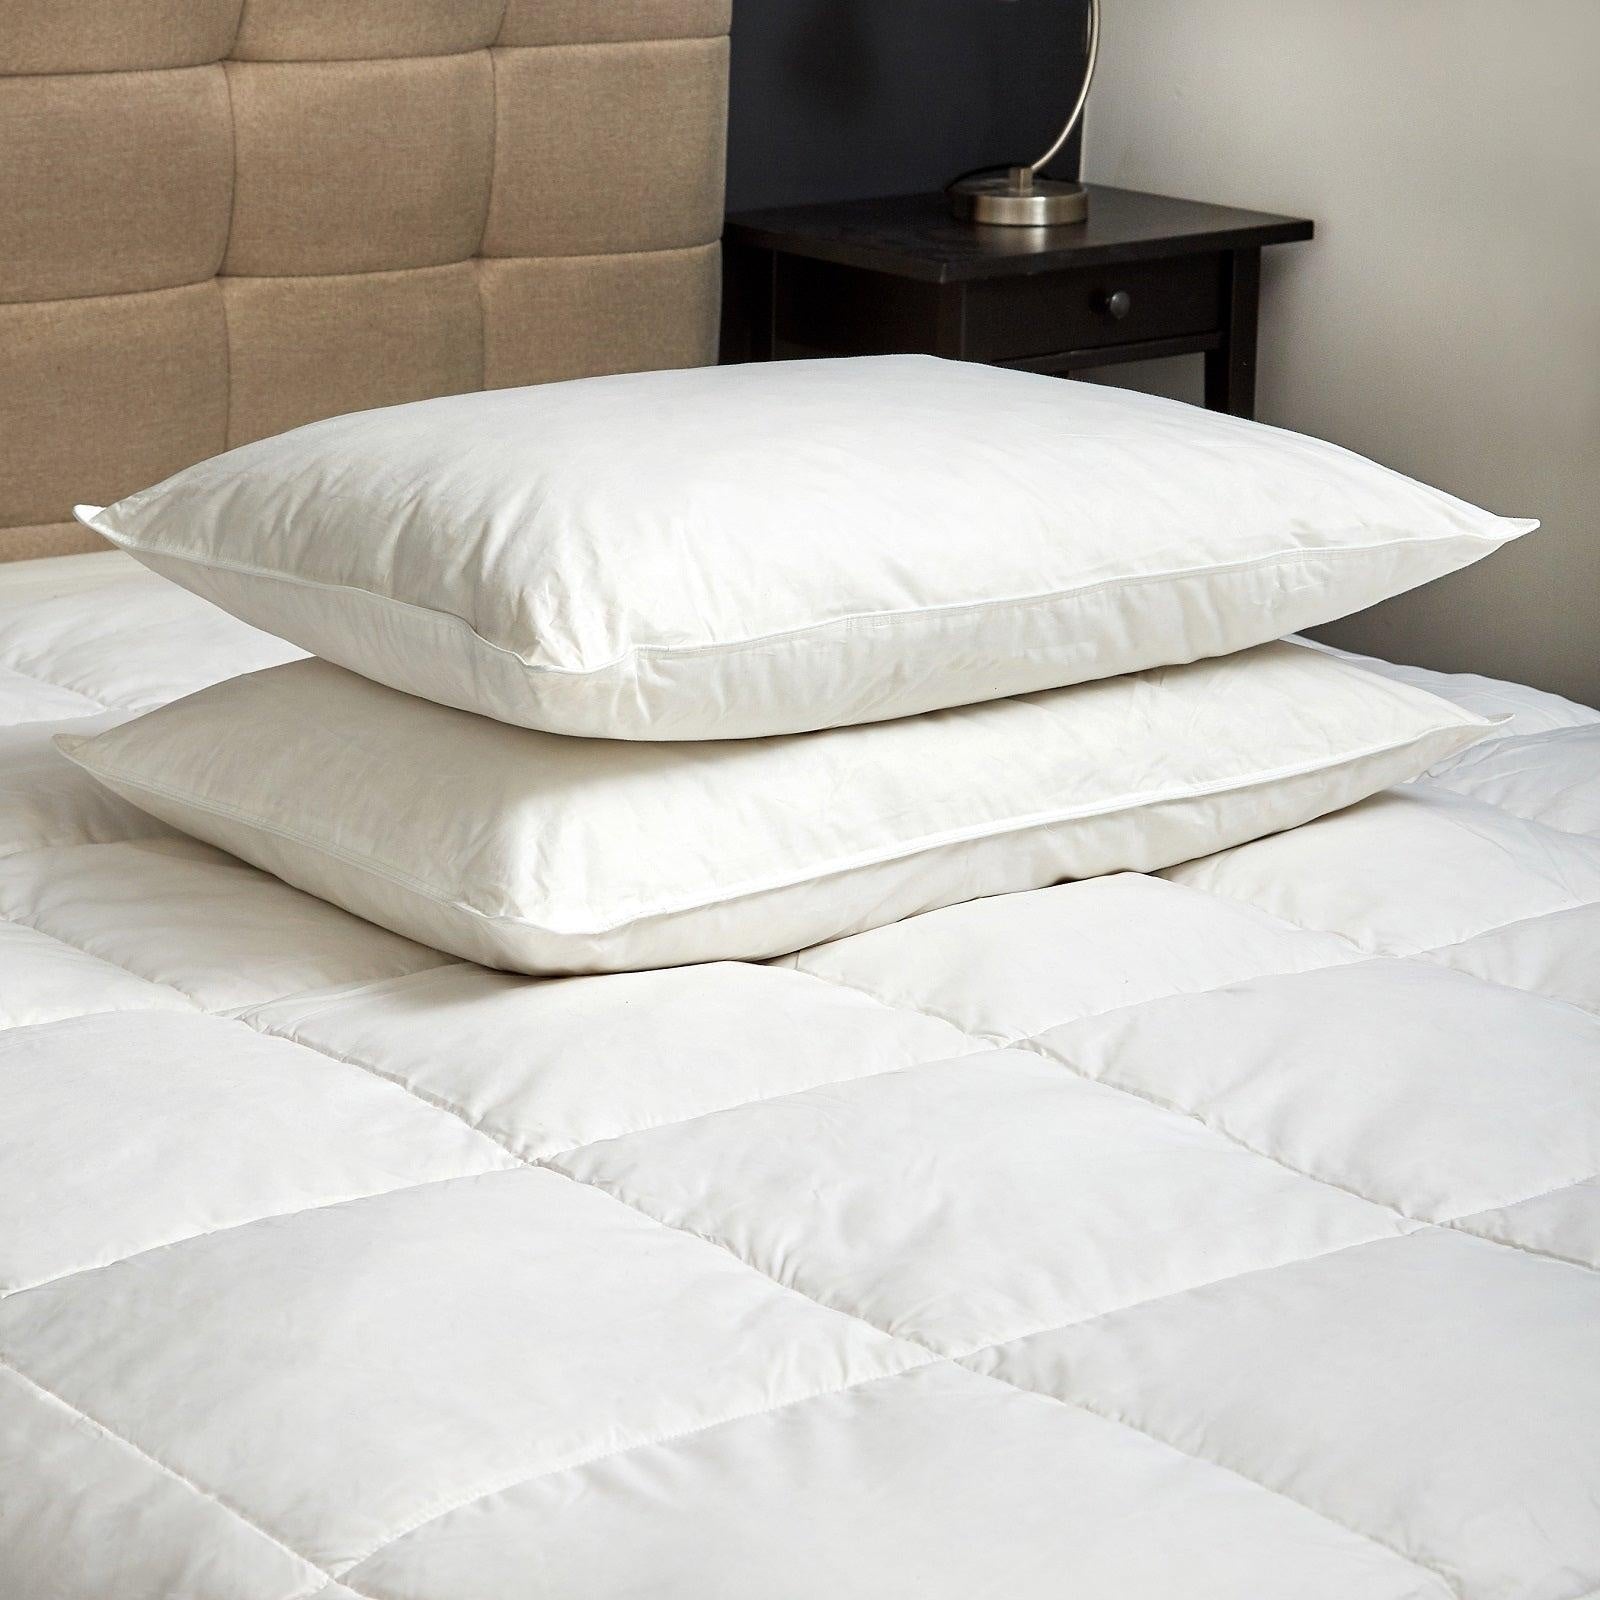 Goose Feather & Down Quilt 500GSM + Goose Feather and Down Pillows 2 Pack Combo Double White Deals499